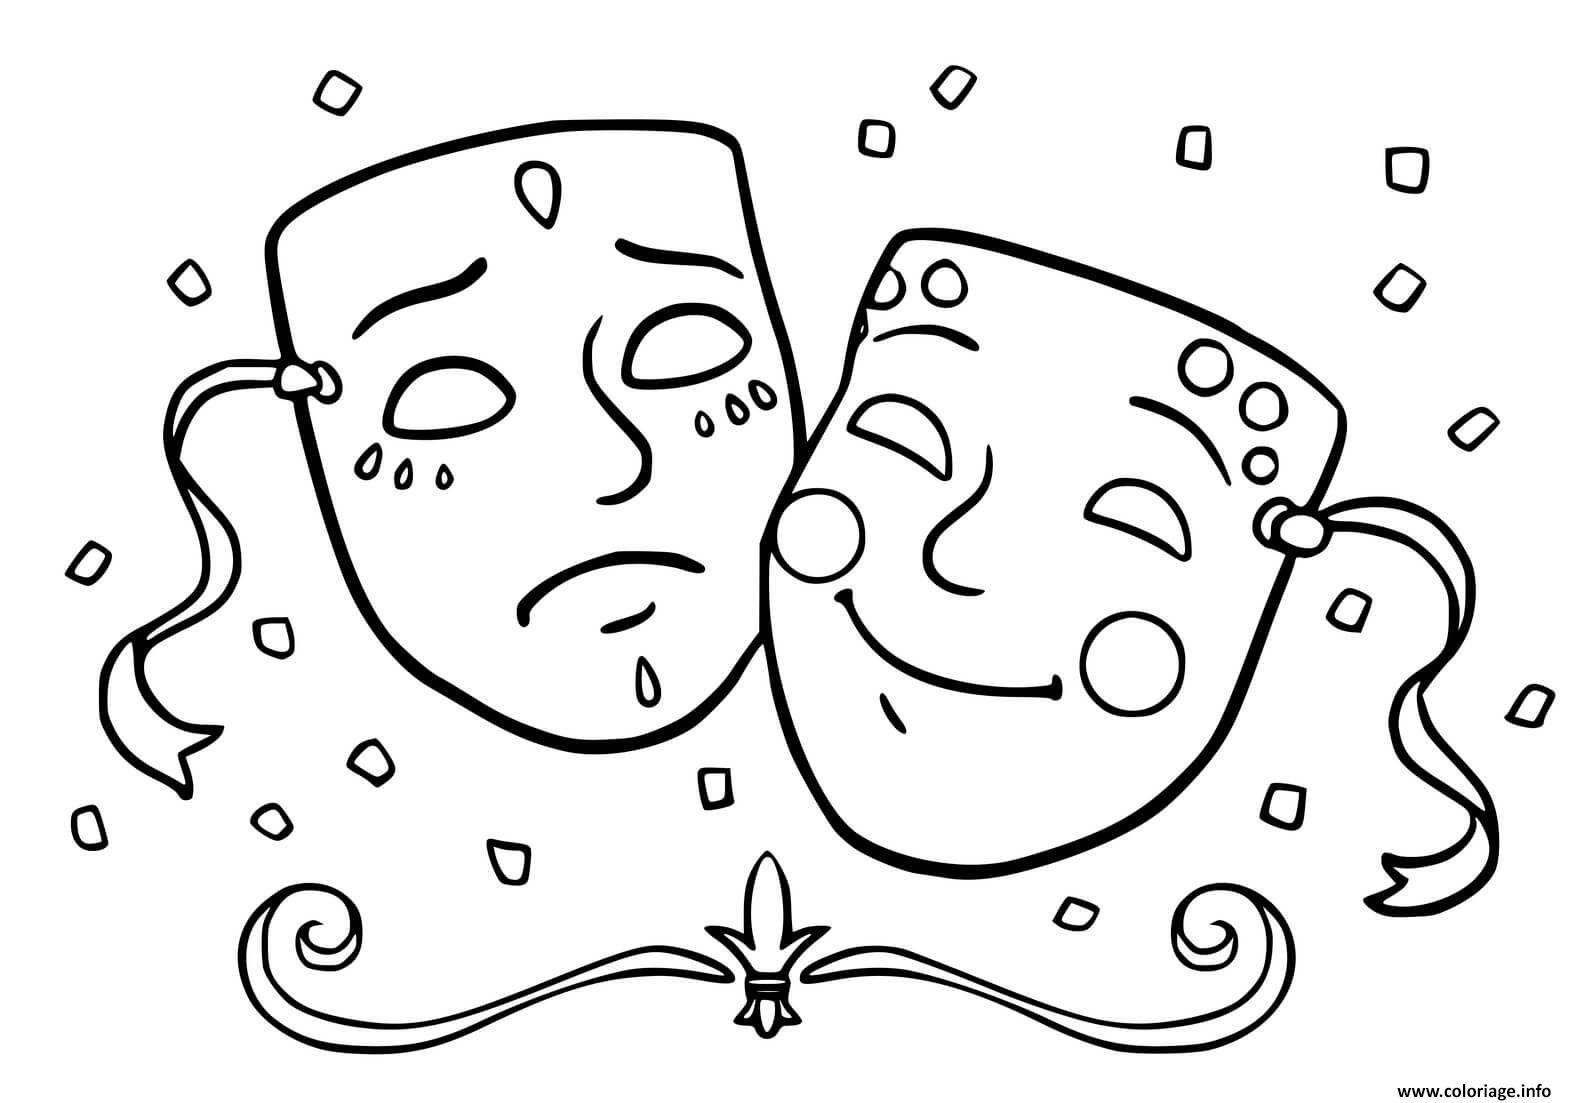 Coloring page magnificent theater